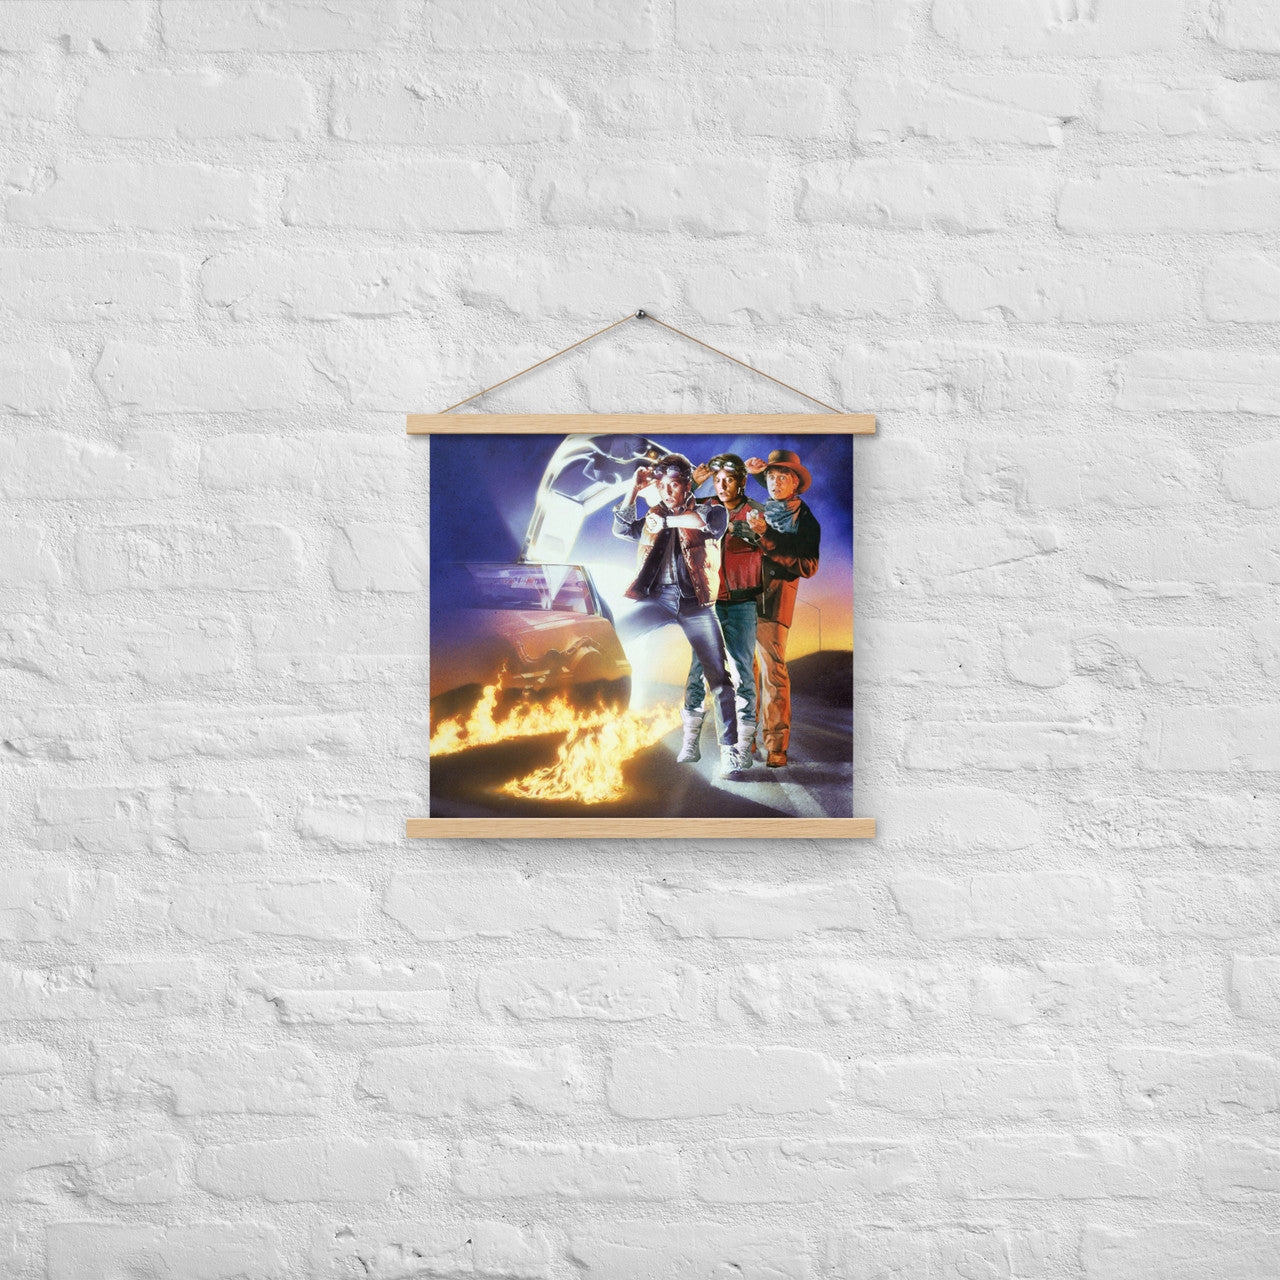 Back To The Future inspired Poster with hangers - Trilogy - Marty McFly 80s Delorean, Doc - Michael J Fox